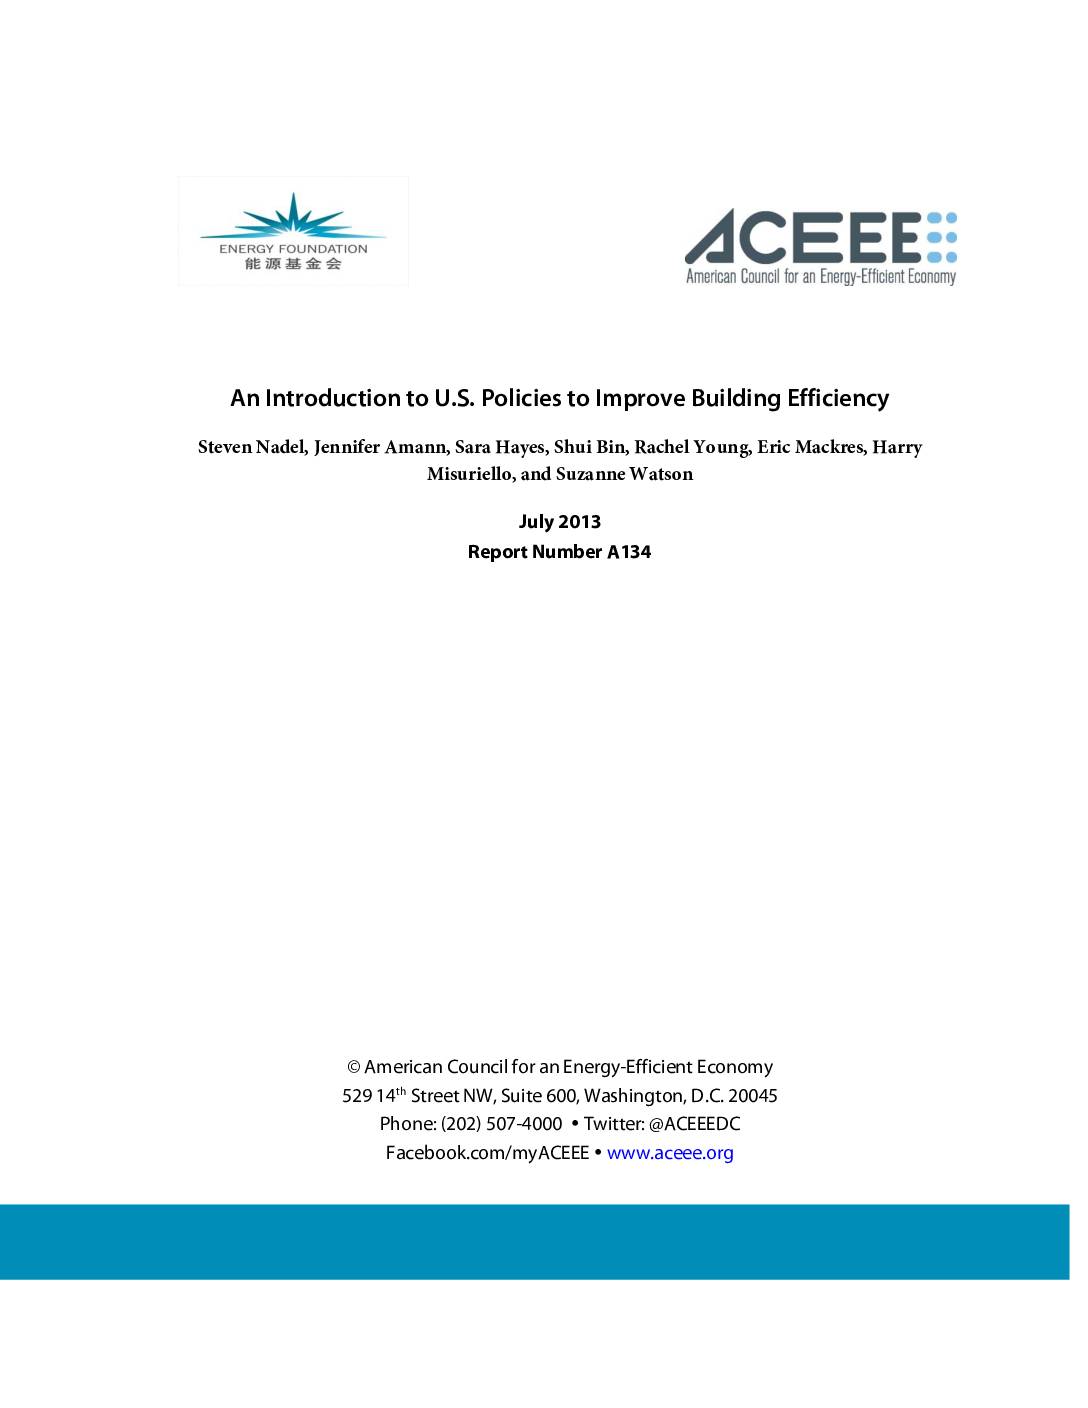 An Introduction to U.S. Policies to Improve Building Efficiency